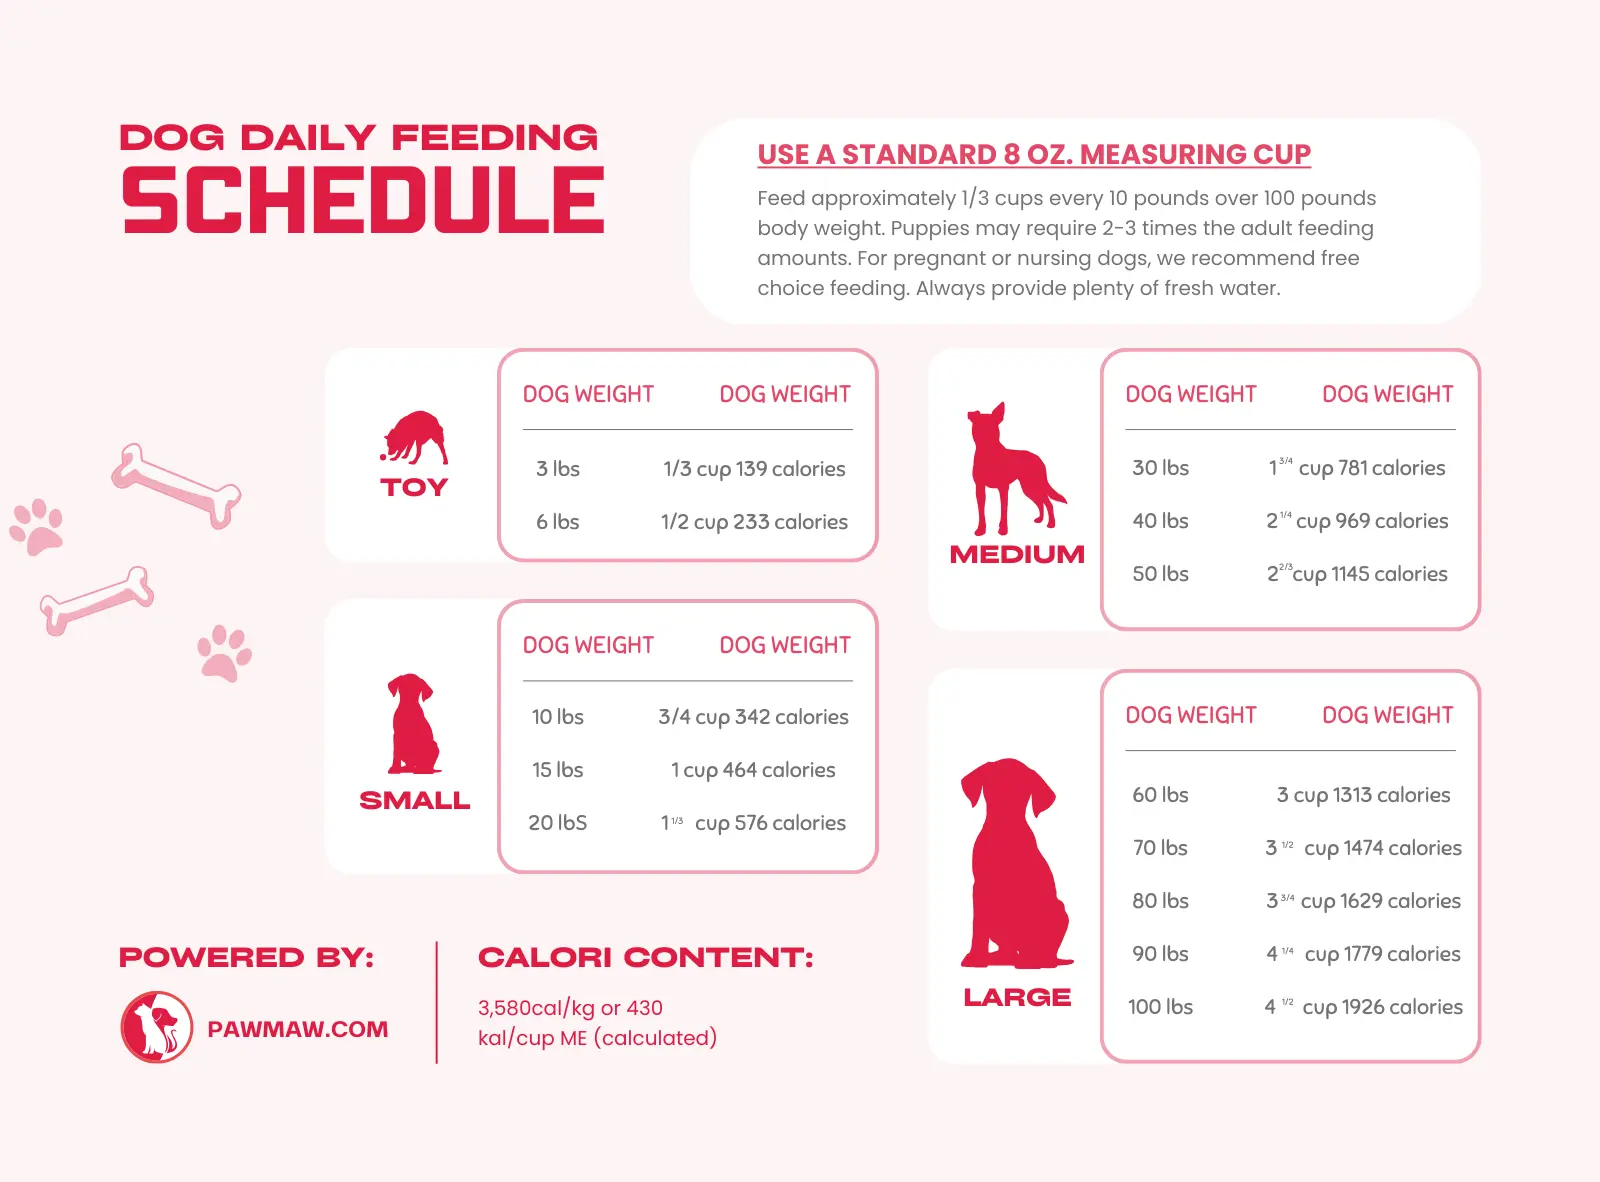 https://pawmaw-images.s3.ap-southeast-1.amazonaws.com/blog-image/DOG-DAILY-FEEDING-SCHEDULE.png